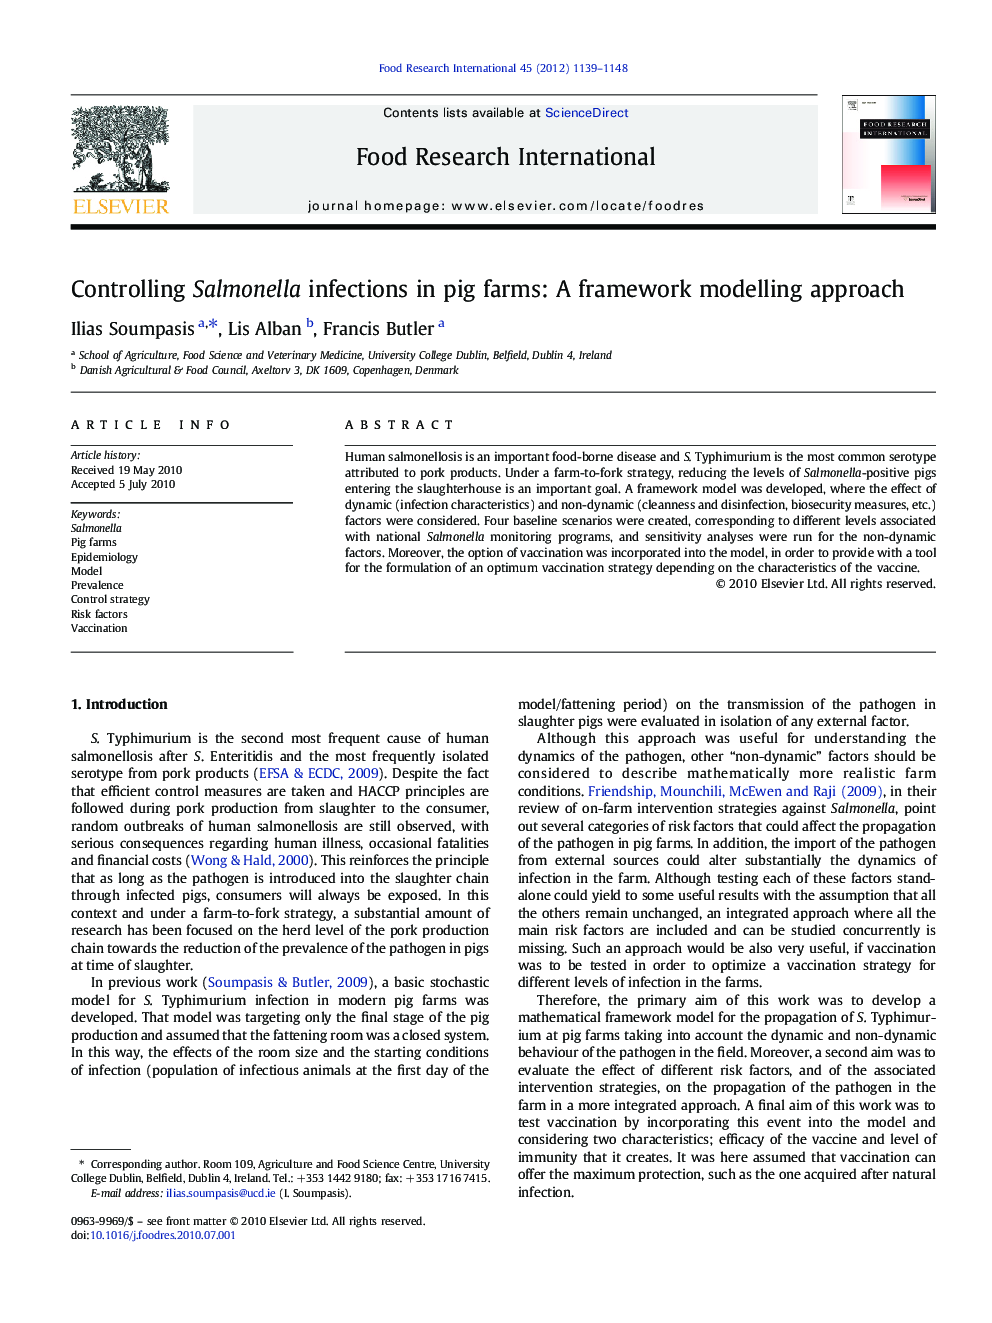 Controlling Salmonella infections in pig farms: A framework modelling approach